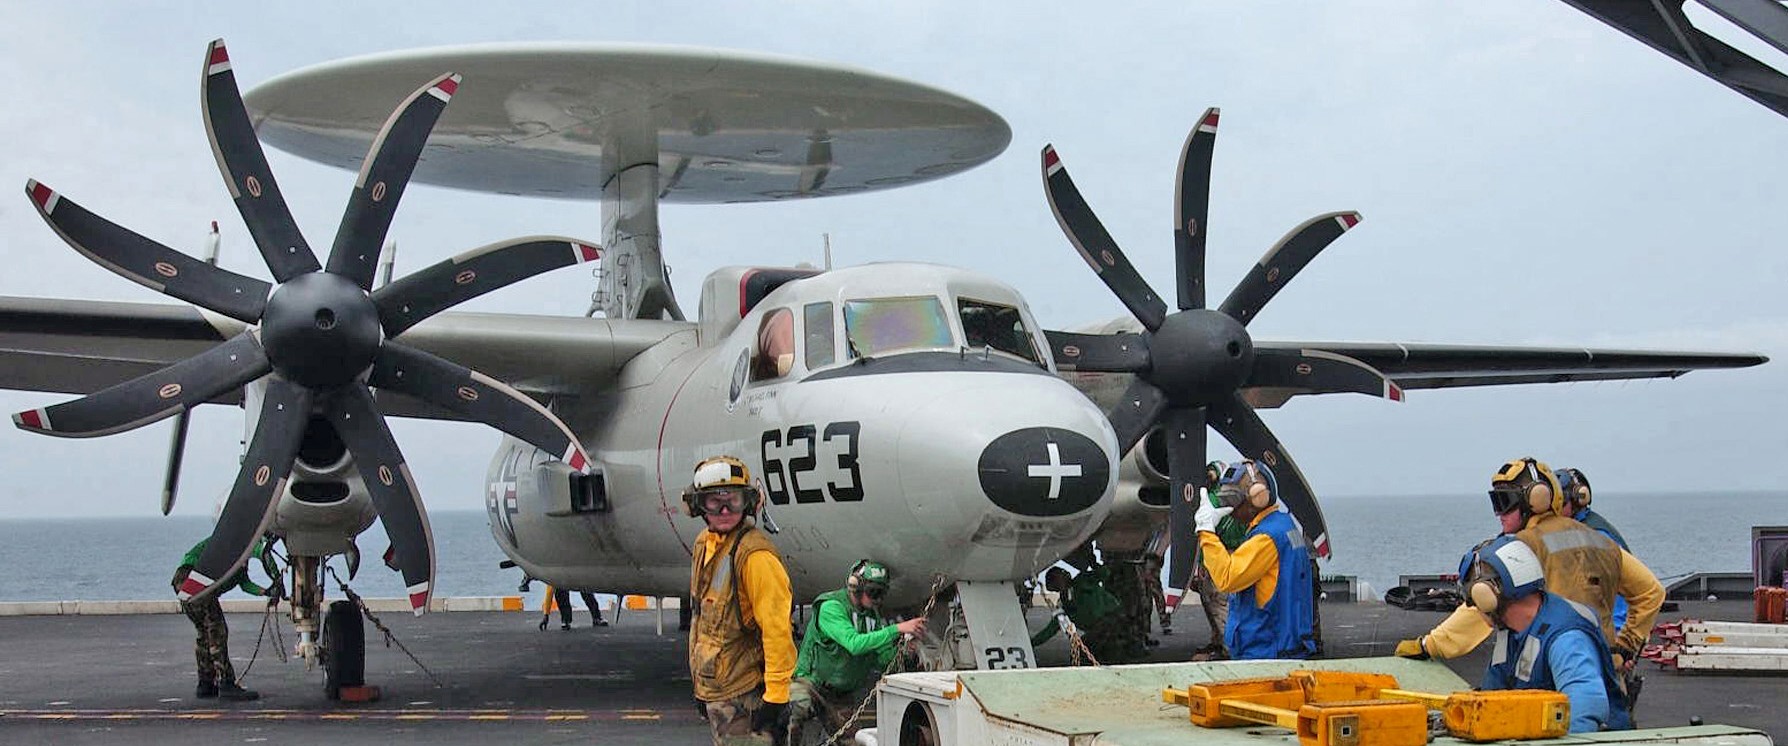 vaw-120 greyhawks carrier airborne early warning squadron e-2c hawkeye replacement uss theodore roosevelt cvn-71 110